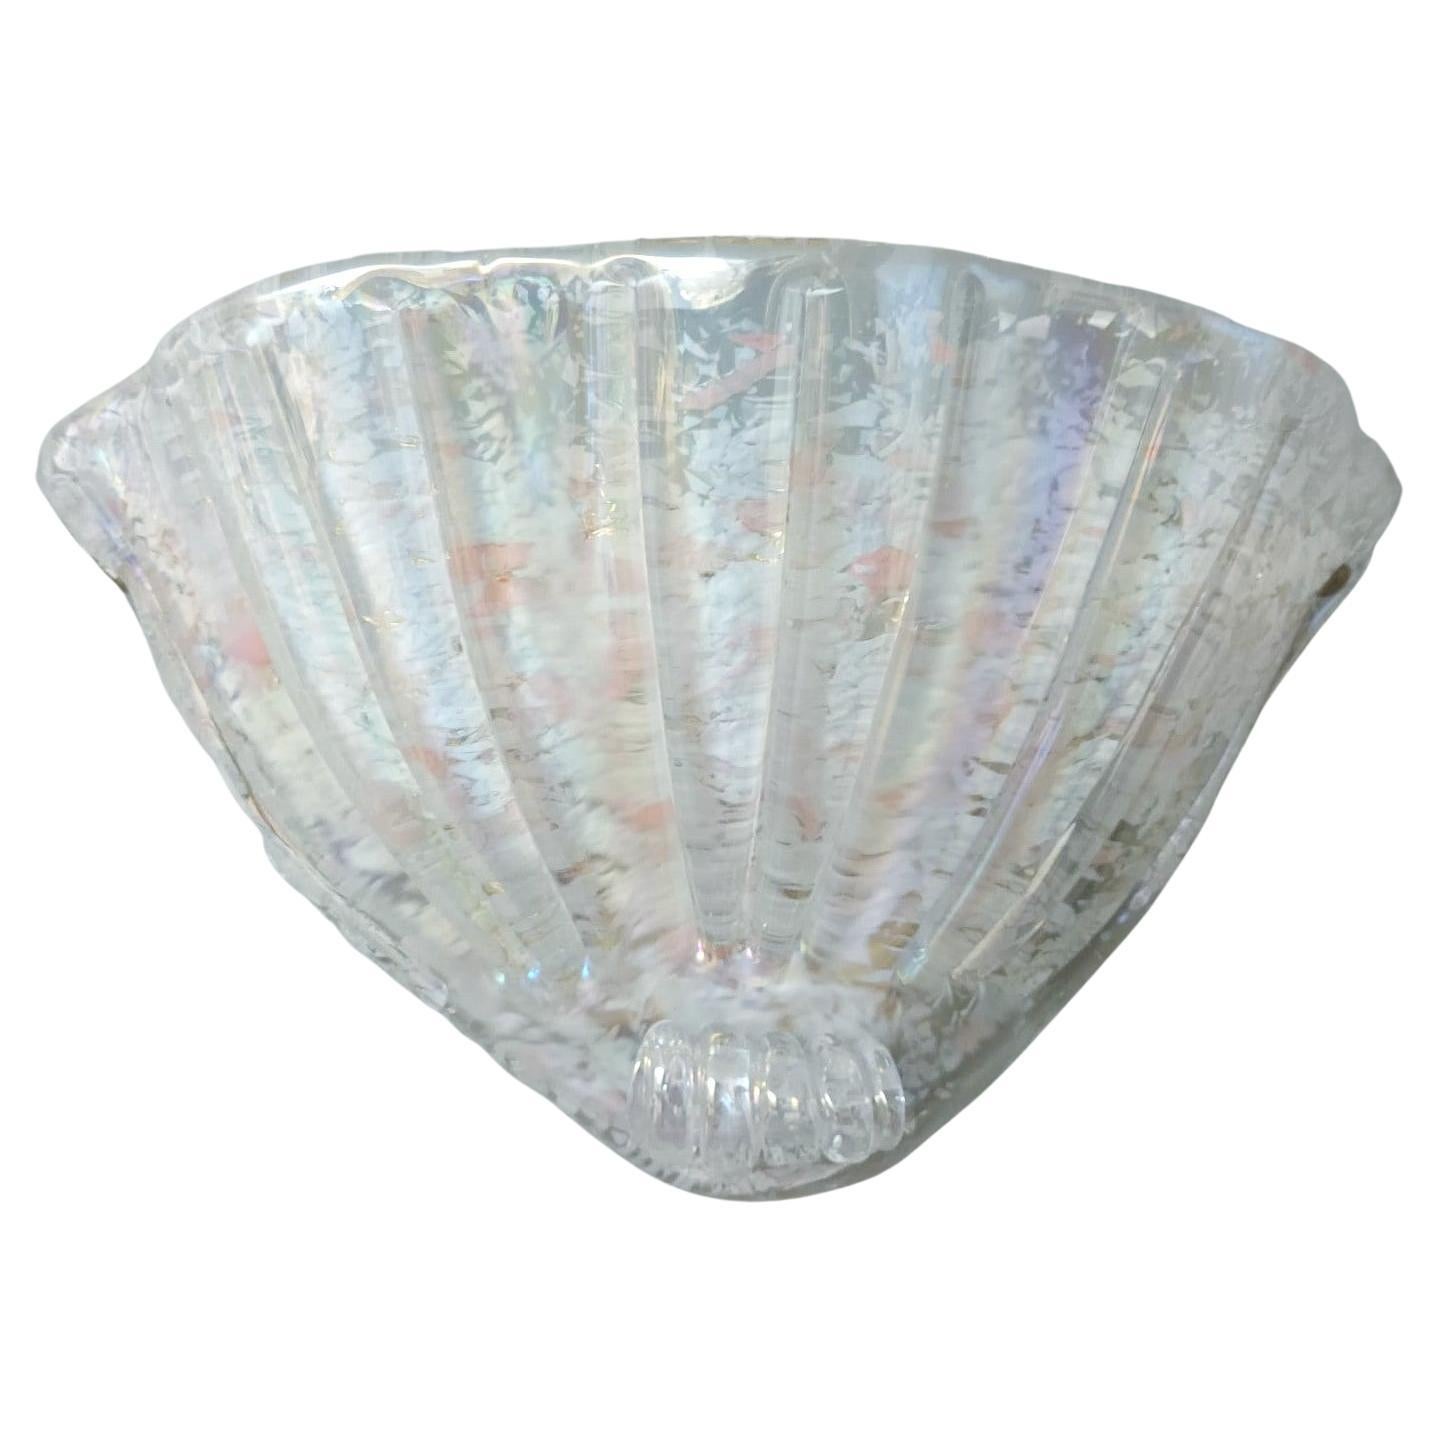 Uplight Shell Sconces, 7 Available For Sale